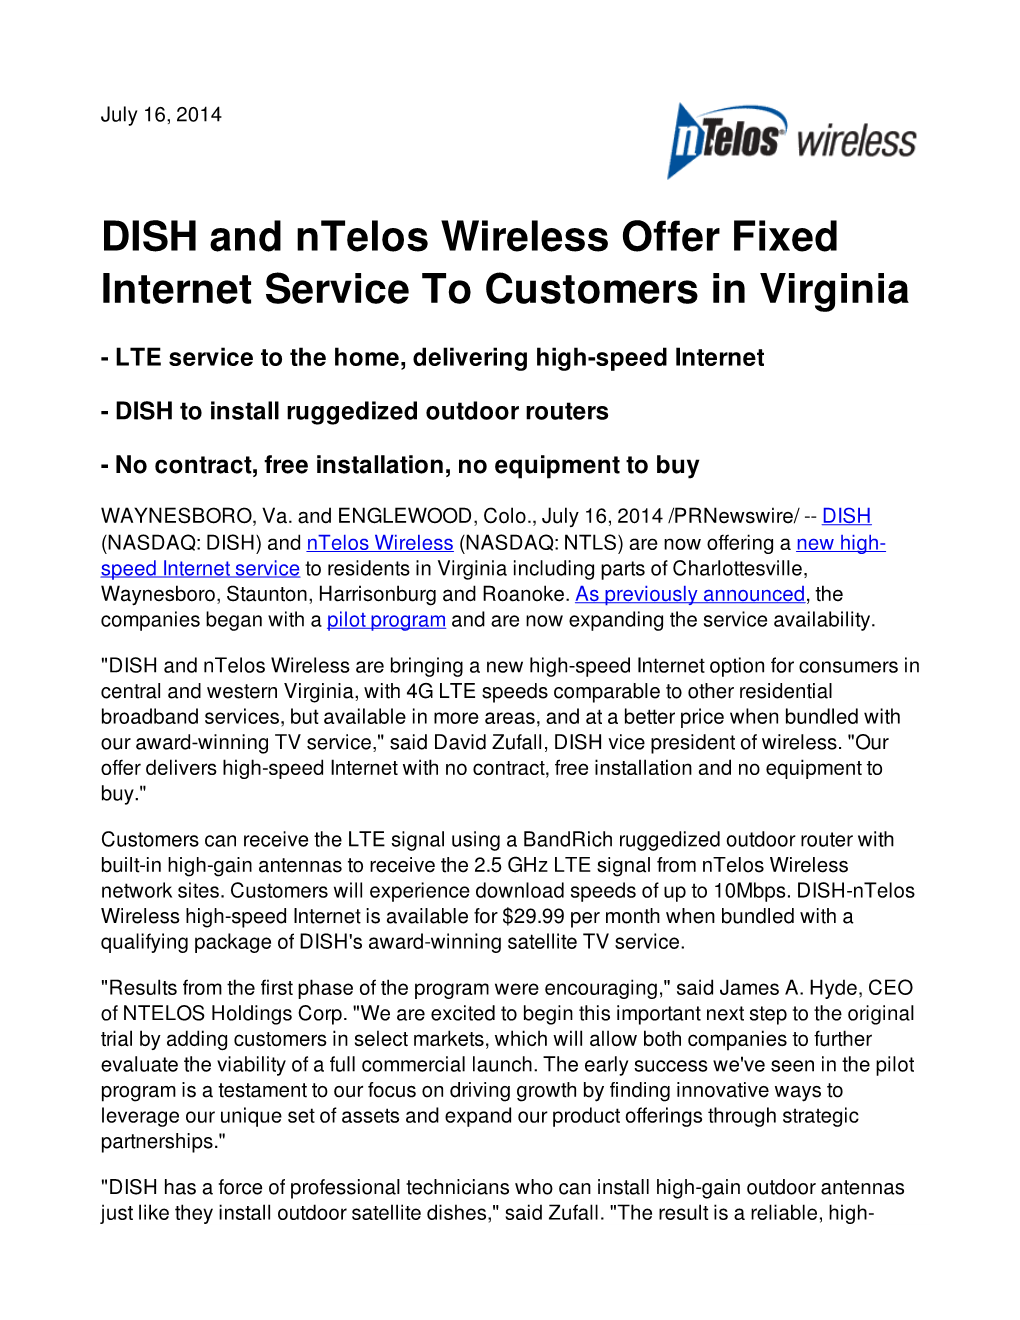 DISH and Ntelos Wireless Offer Fixed Internet Service to Customers in Virginia